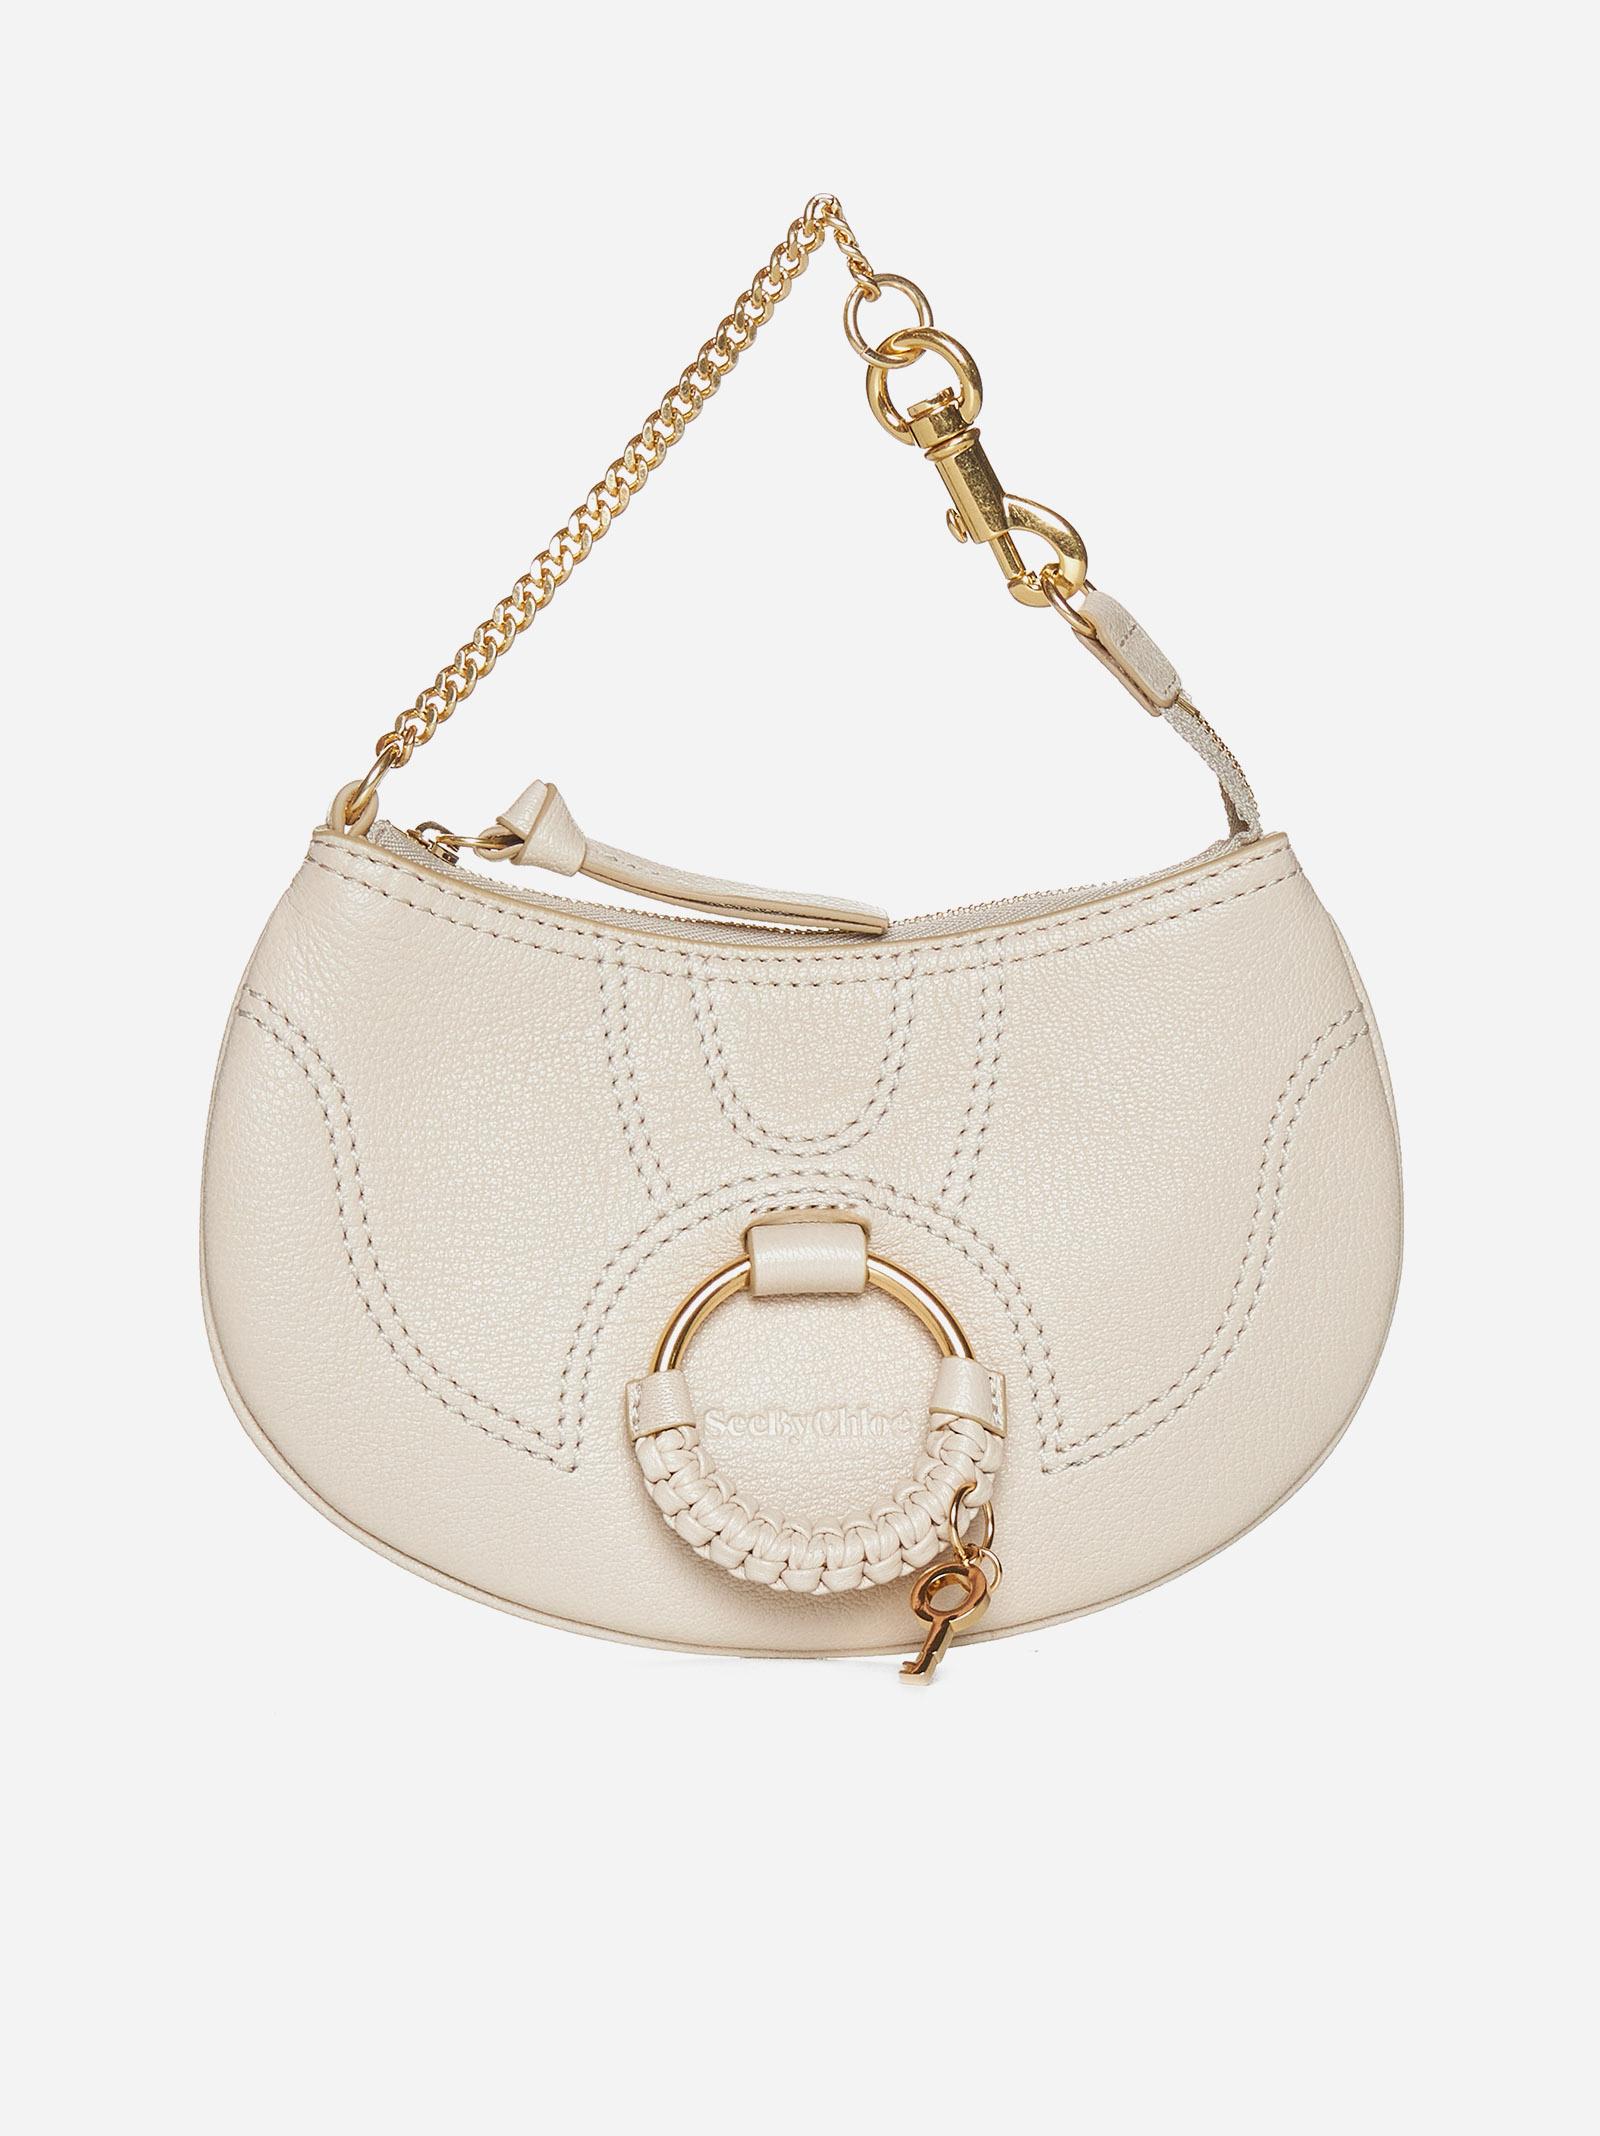 See By Chloé Hana Leather Shoulder Bag in White | Lyst